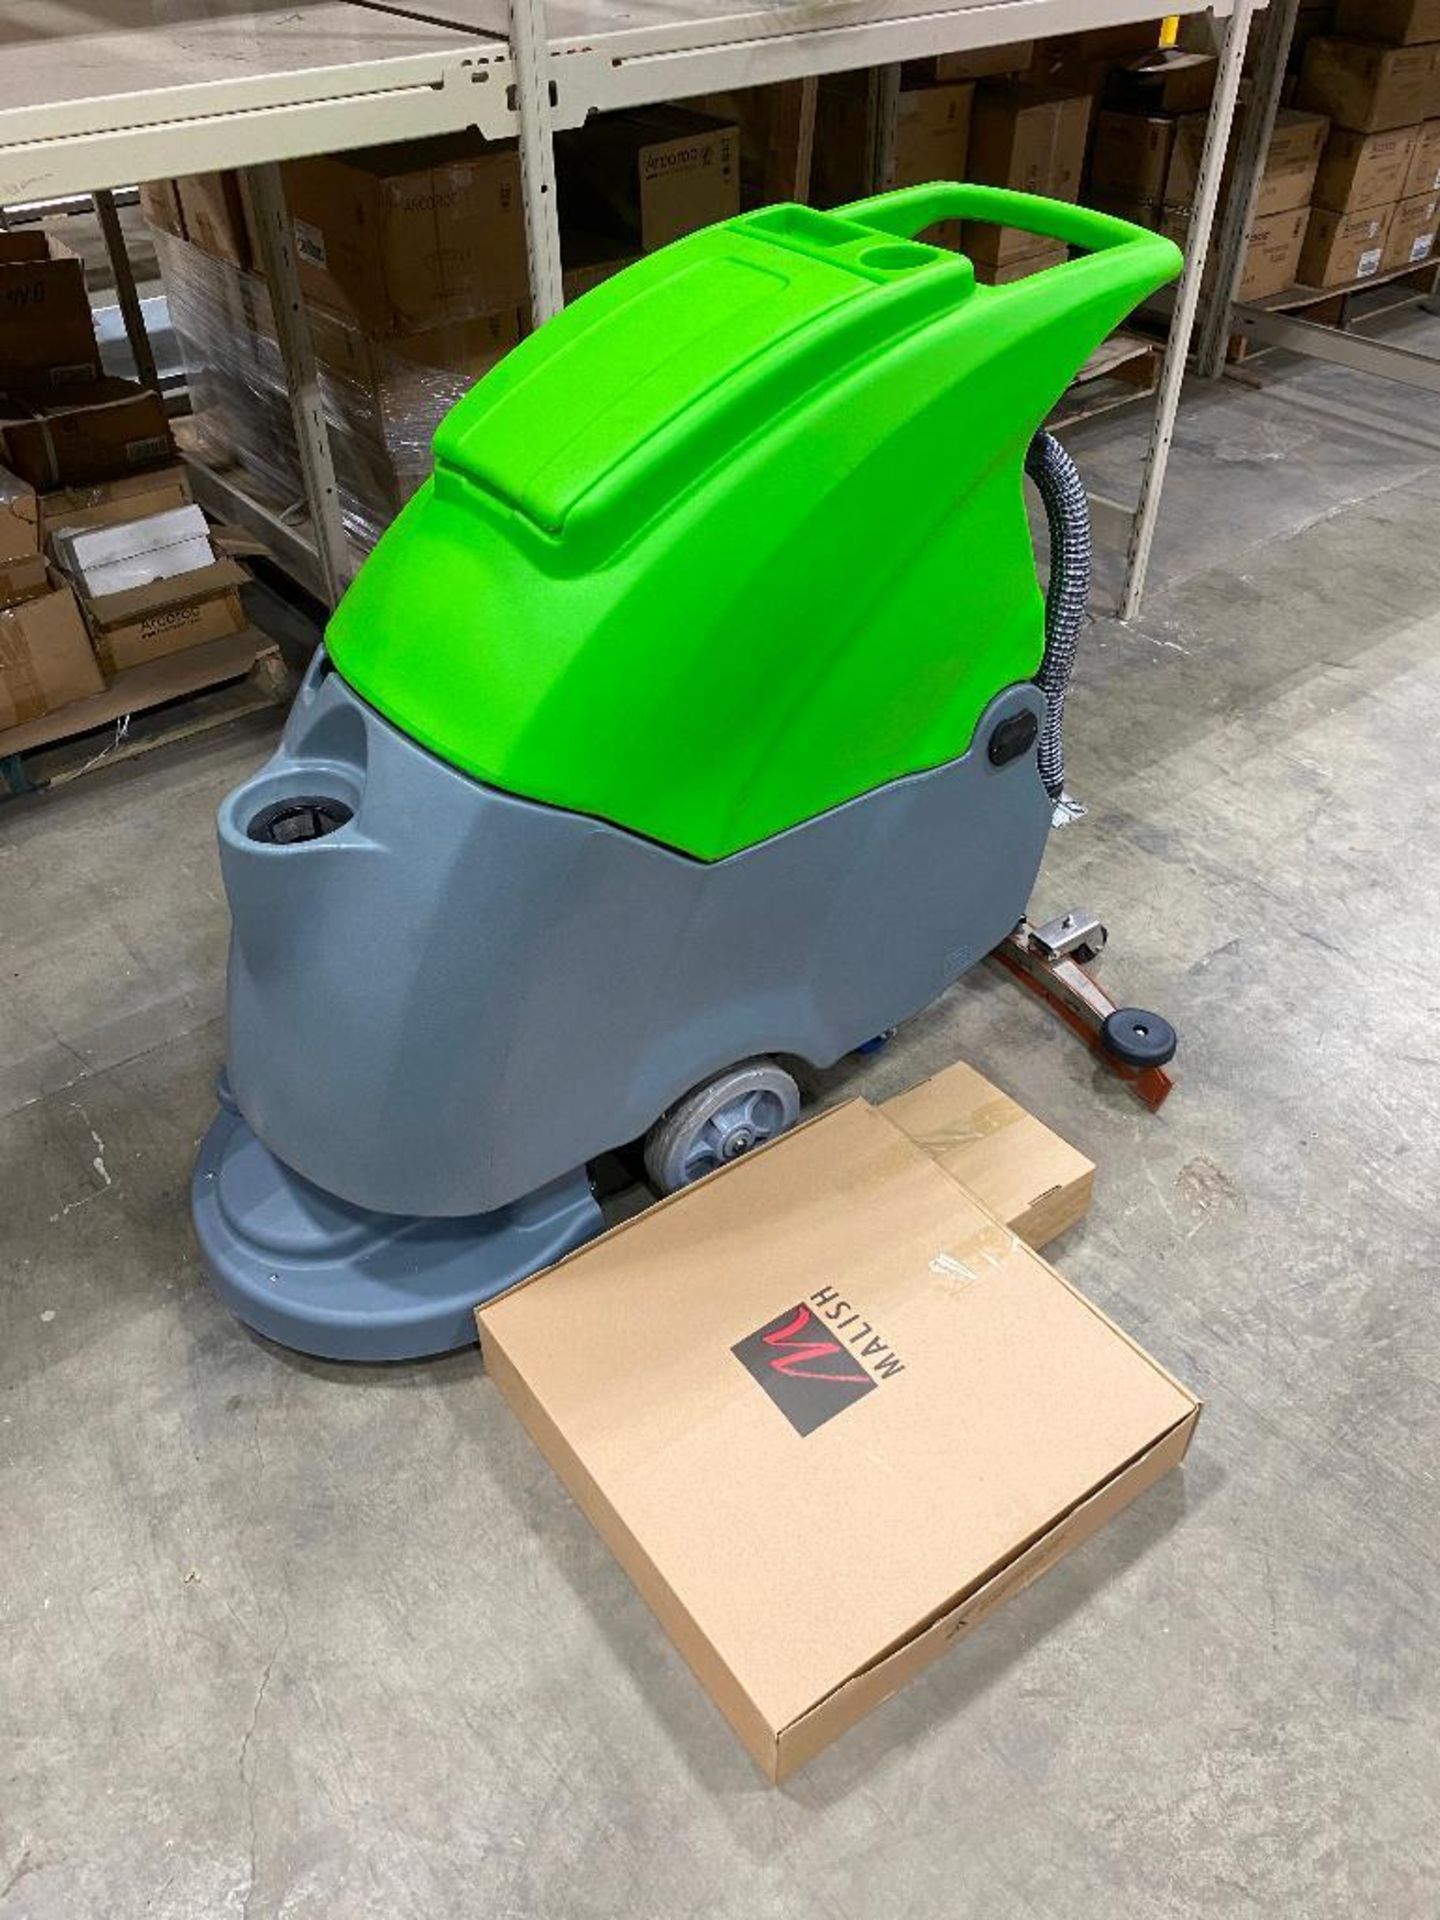 New 2022 Aokeqi OK-500 19" Wide Walk Behind Electric Industrial Semi-Auto Floor Scrubber - Image 2 of 6